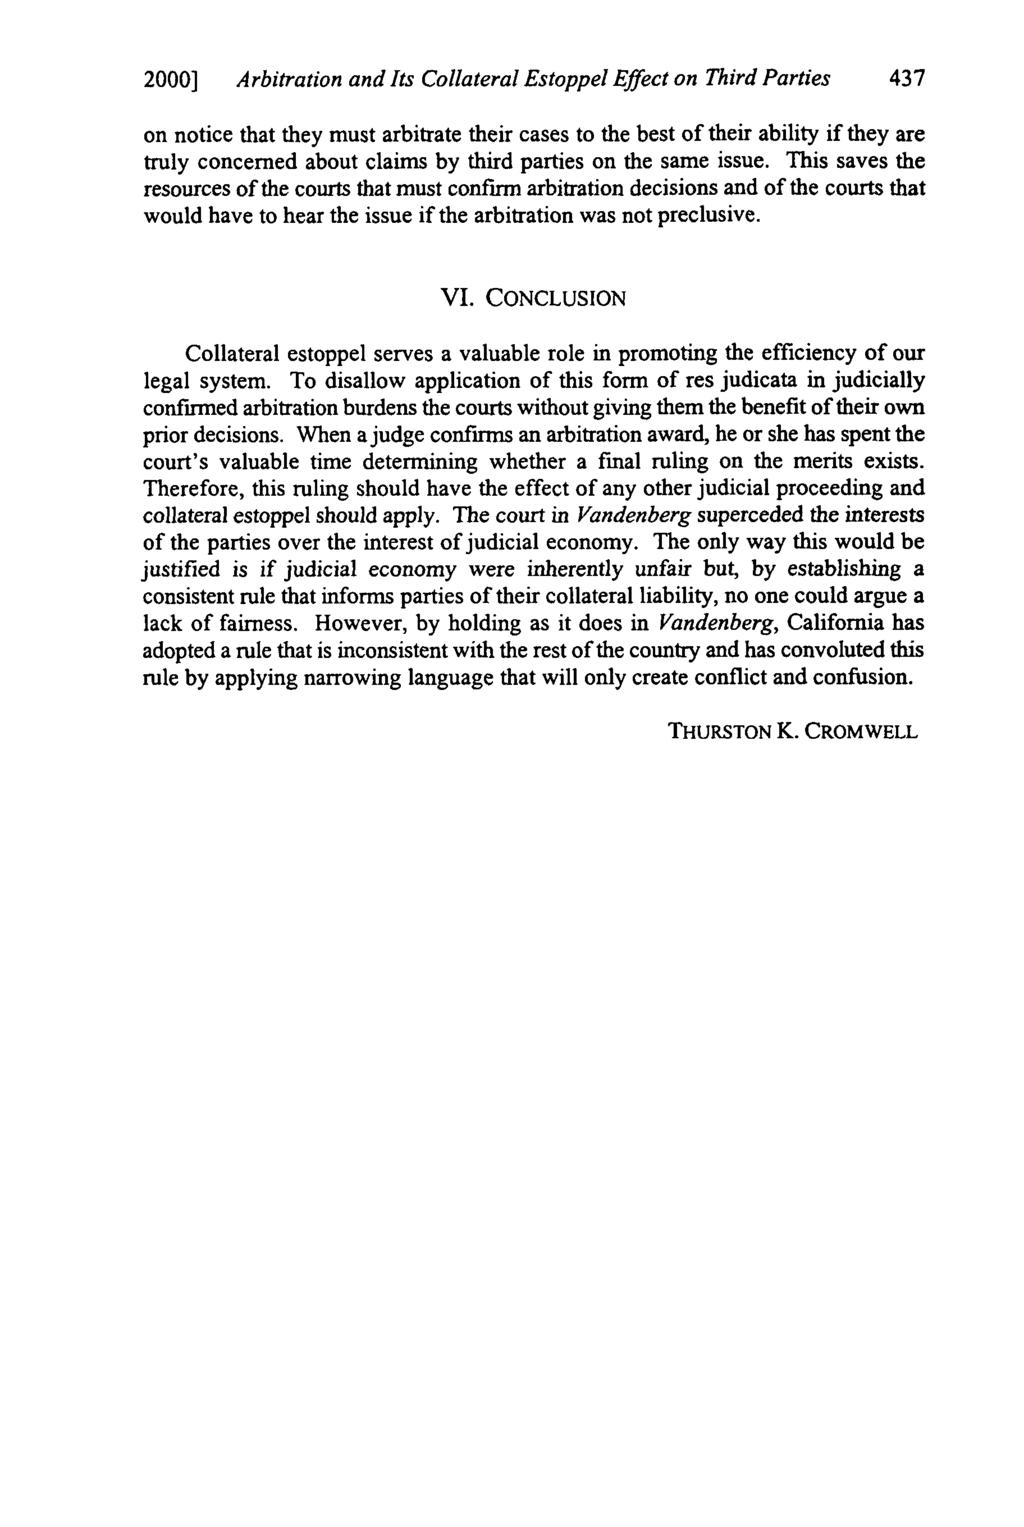 Cromwell: Cromwell: Arbitration and Its Collateral 2000] Arbitration and Its Collateral Estoppel Effect on Third Parties 437 on notice that they must arbitrate their cases to the best of their